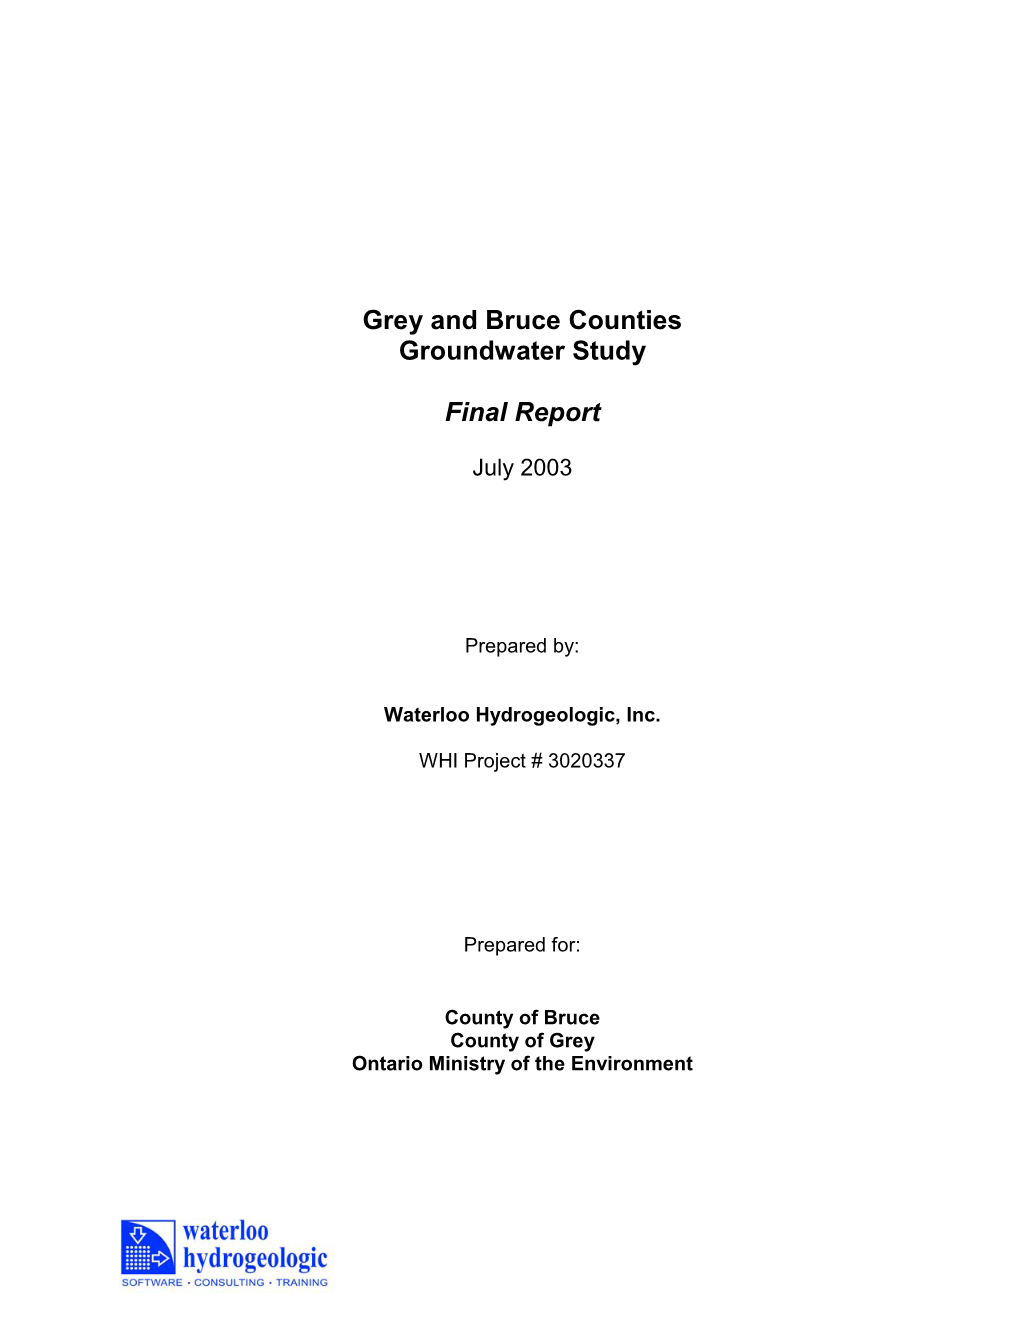 Grey and Bruce Counties Groundwater Study Final Report